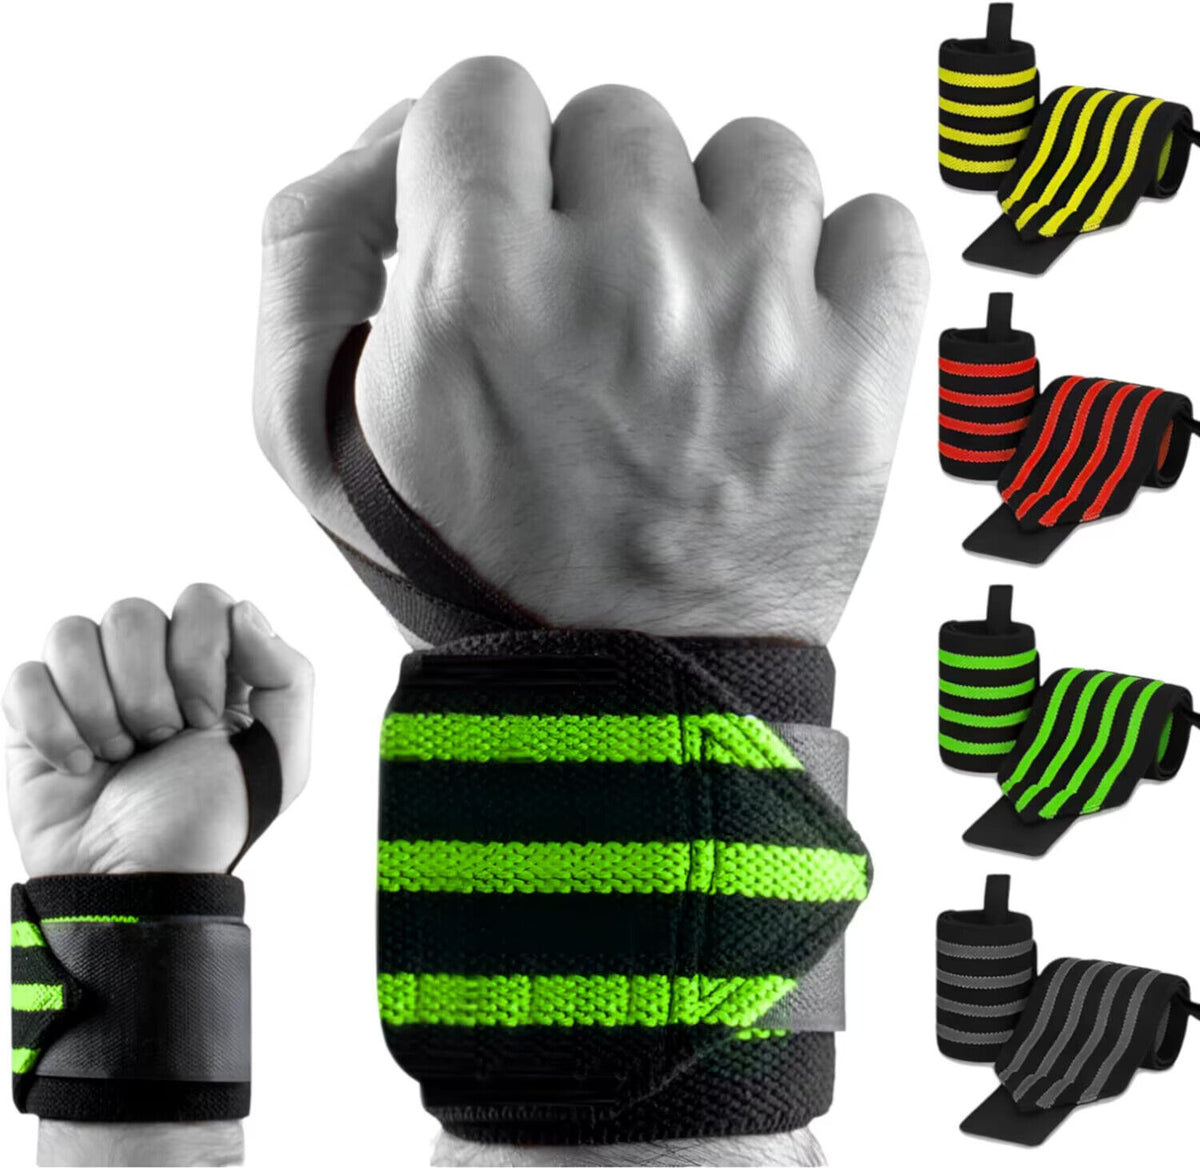 Kingdom GB Hand Wrist Wraps 1xPair Fitness Gym Exercise Weightlifting Men Womens